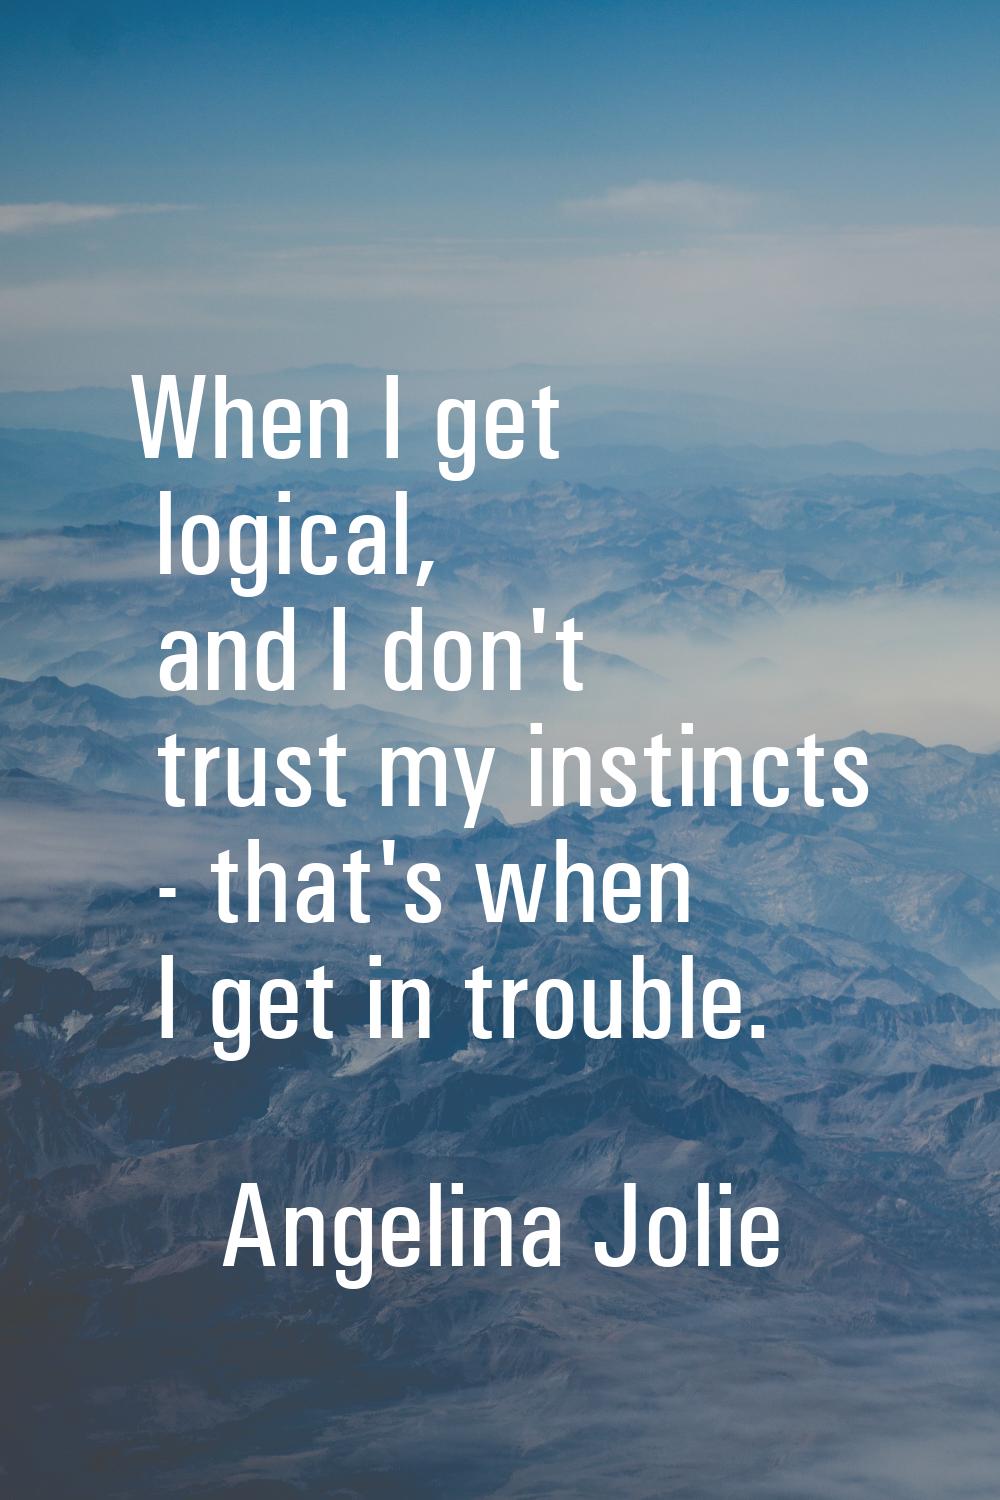 When I get logical, and I don't trust my instincts - that's when I get in trouble.